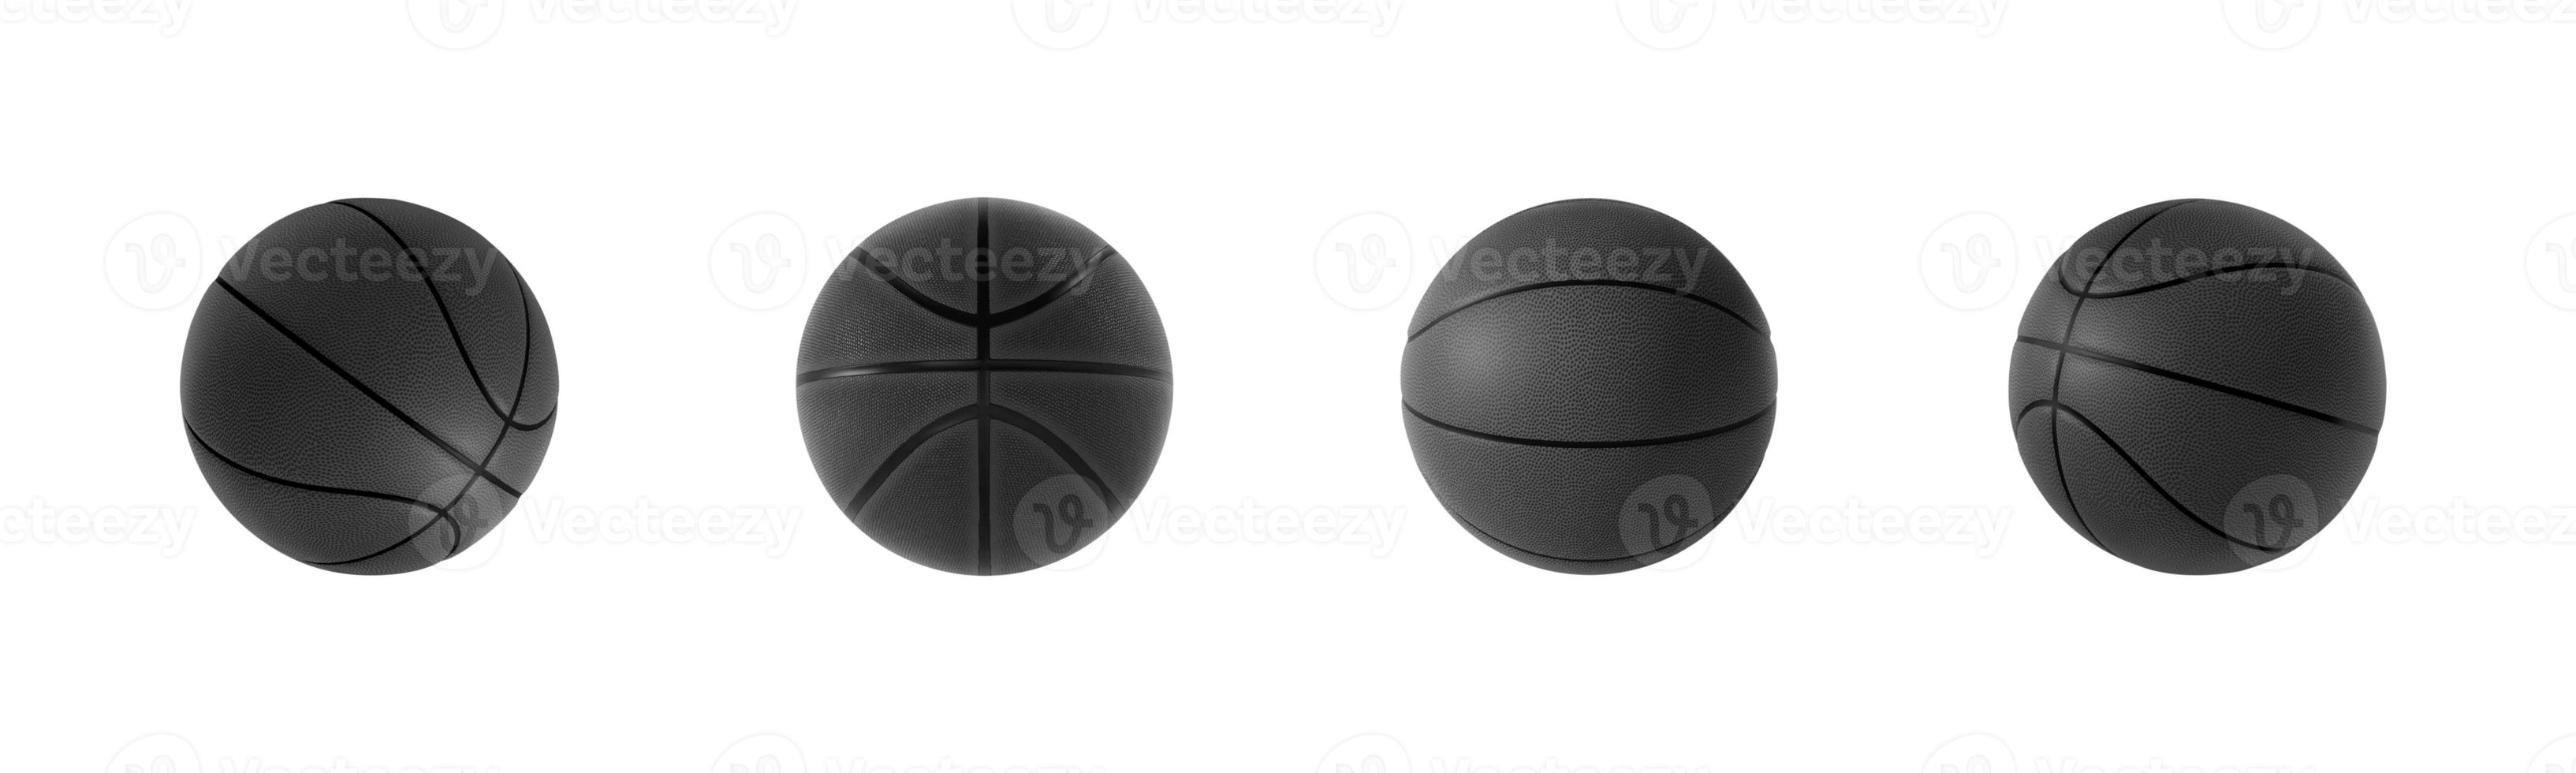 Basketball ball isolated on white background. 3d rendering photo